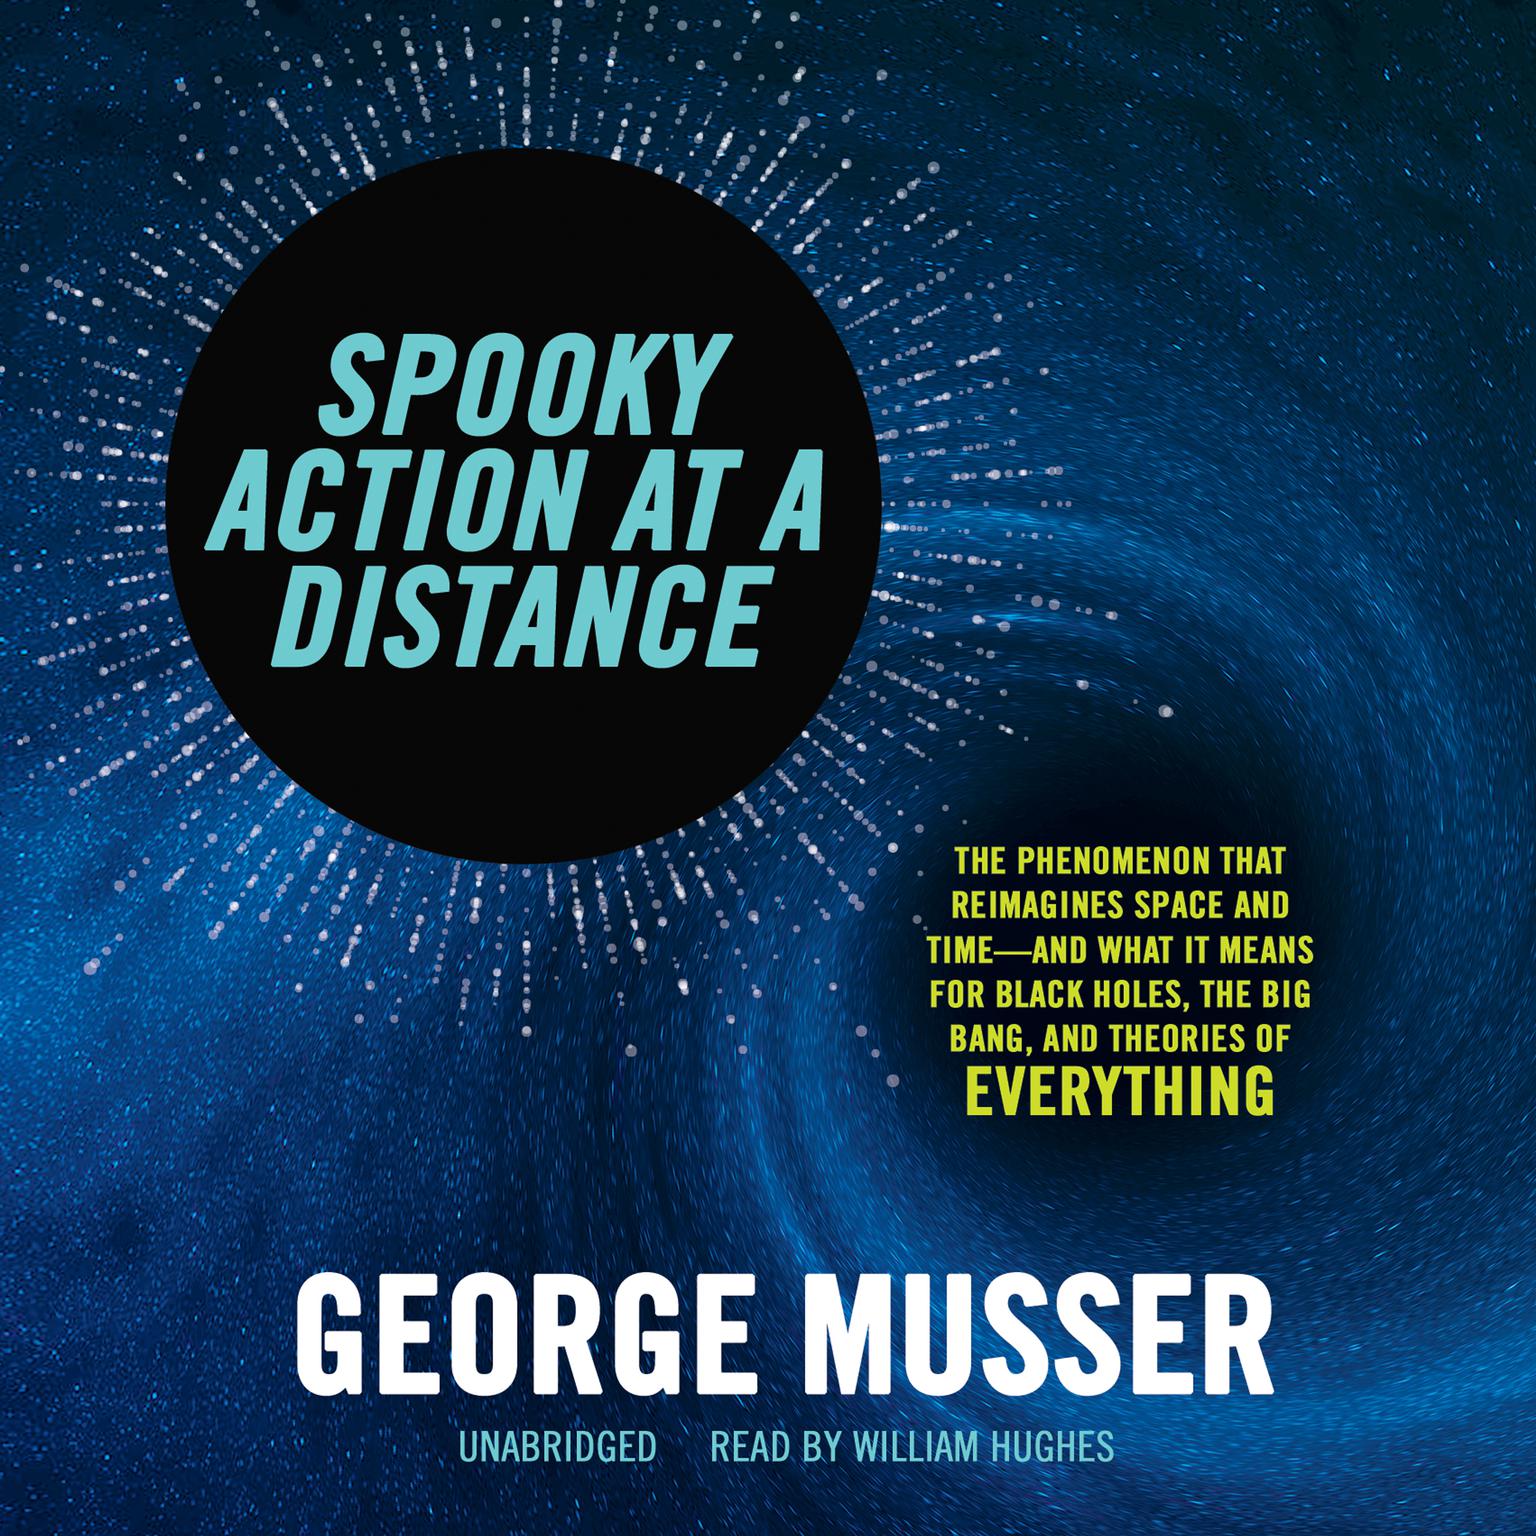 Spooky Action at a Distance: The Phenomenon That Reimagines Space and Time—and What It Means for Black Holes, the Big Bang, and Theories of Everything Audiobook, by George Musser